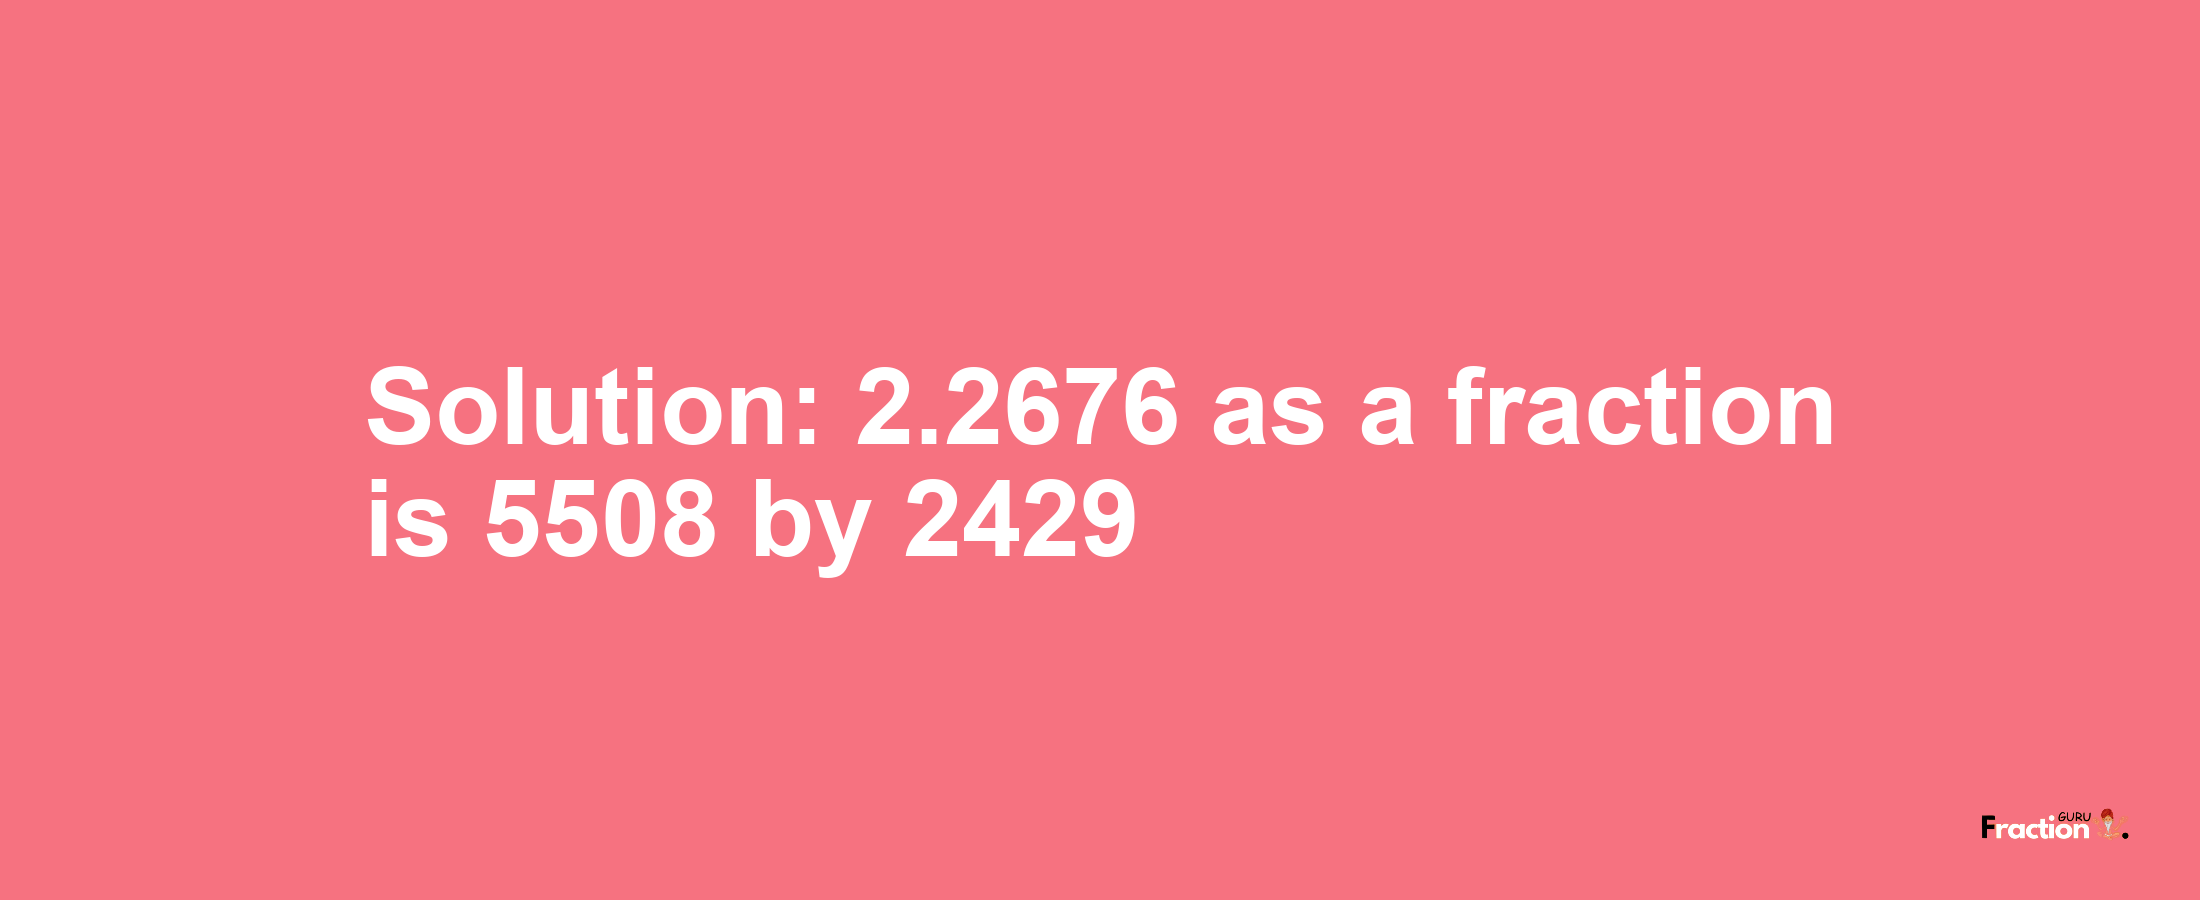 Solution:2.2676 as a fraction is 5508/2429